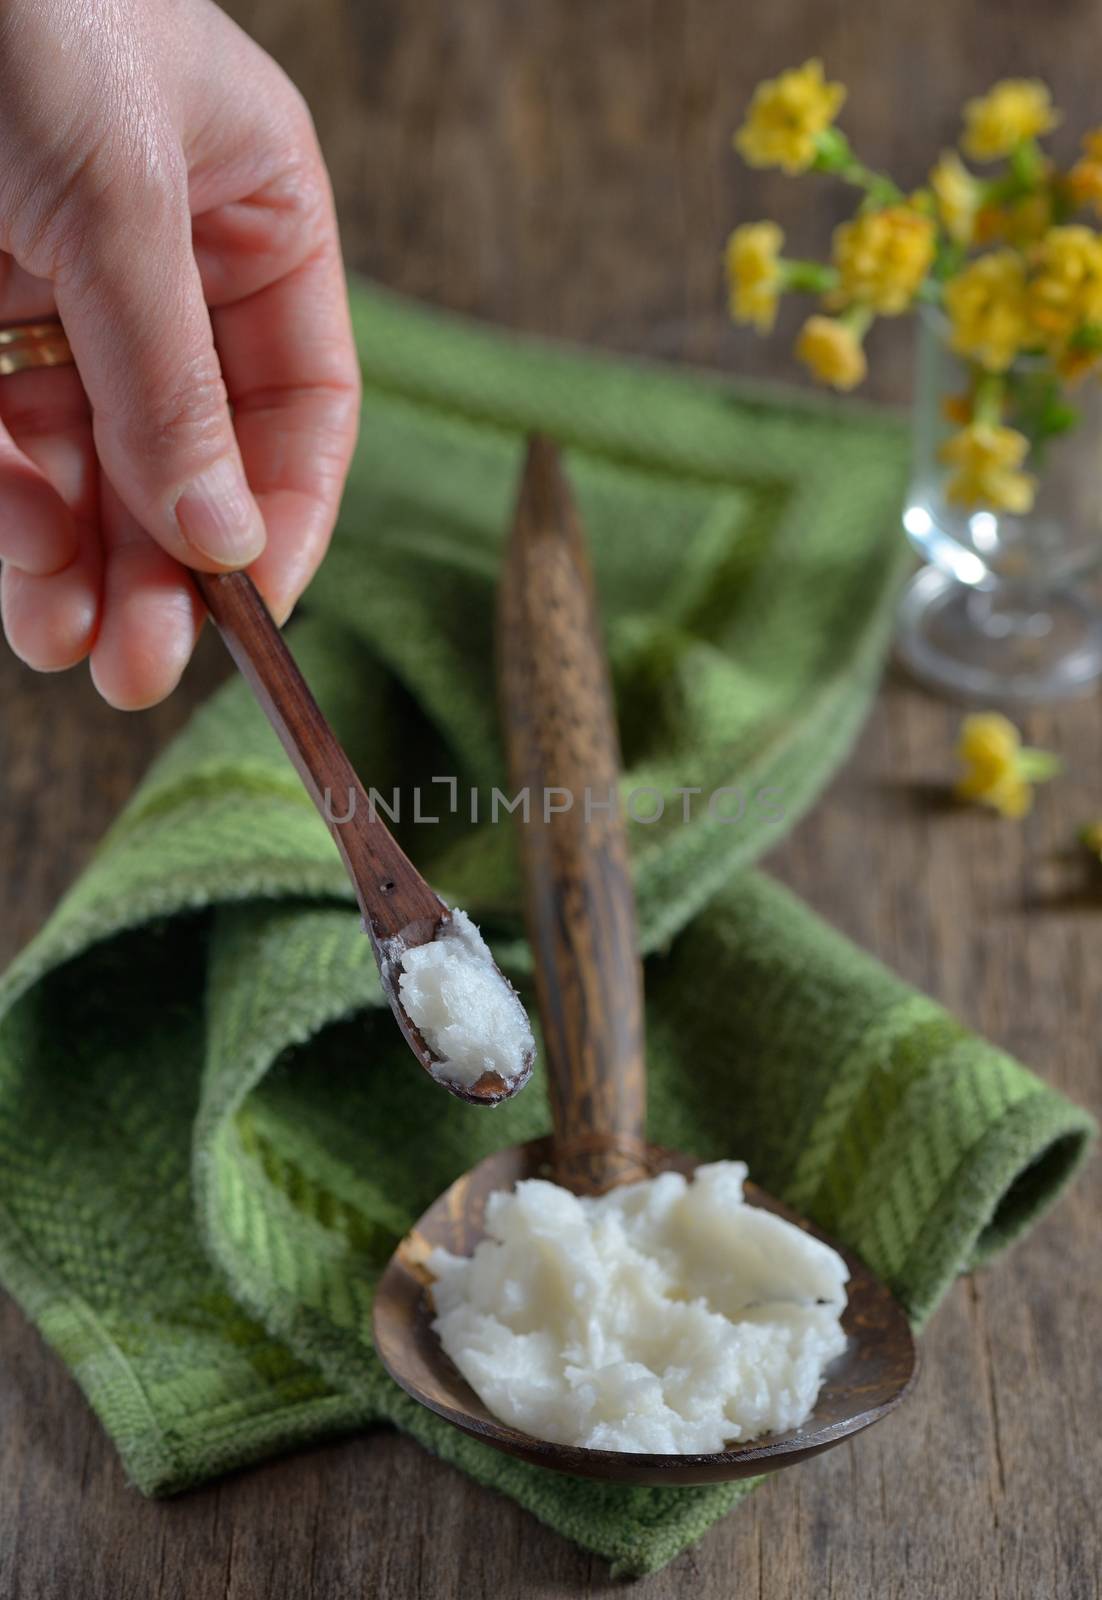 coconut oil on the spoon by mady70